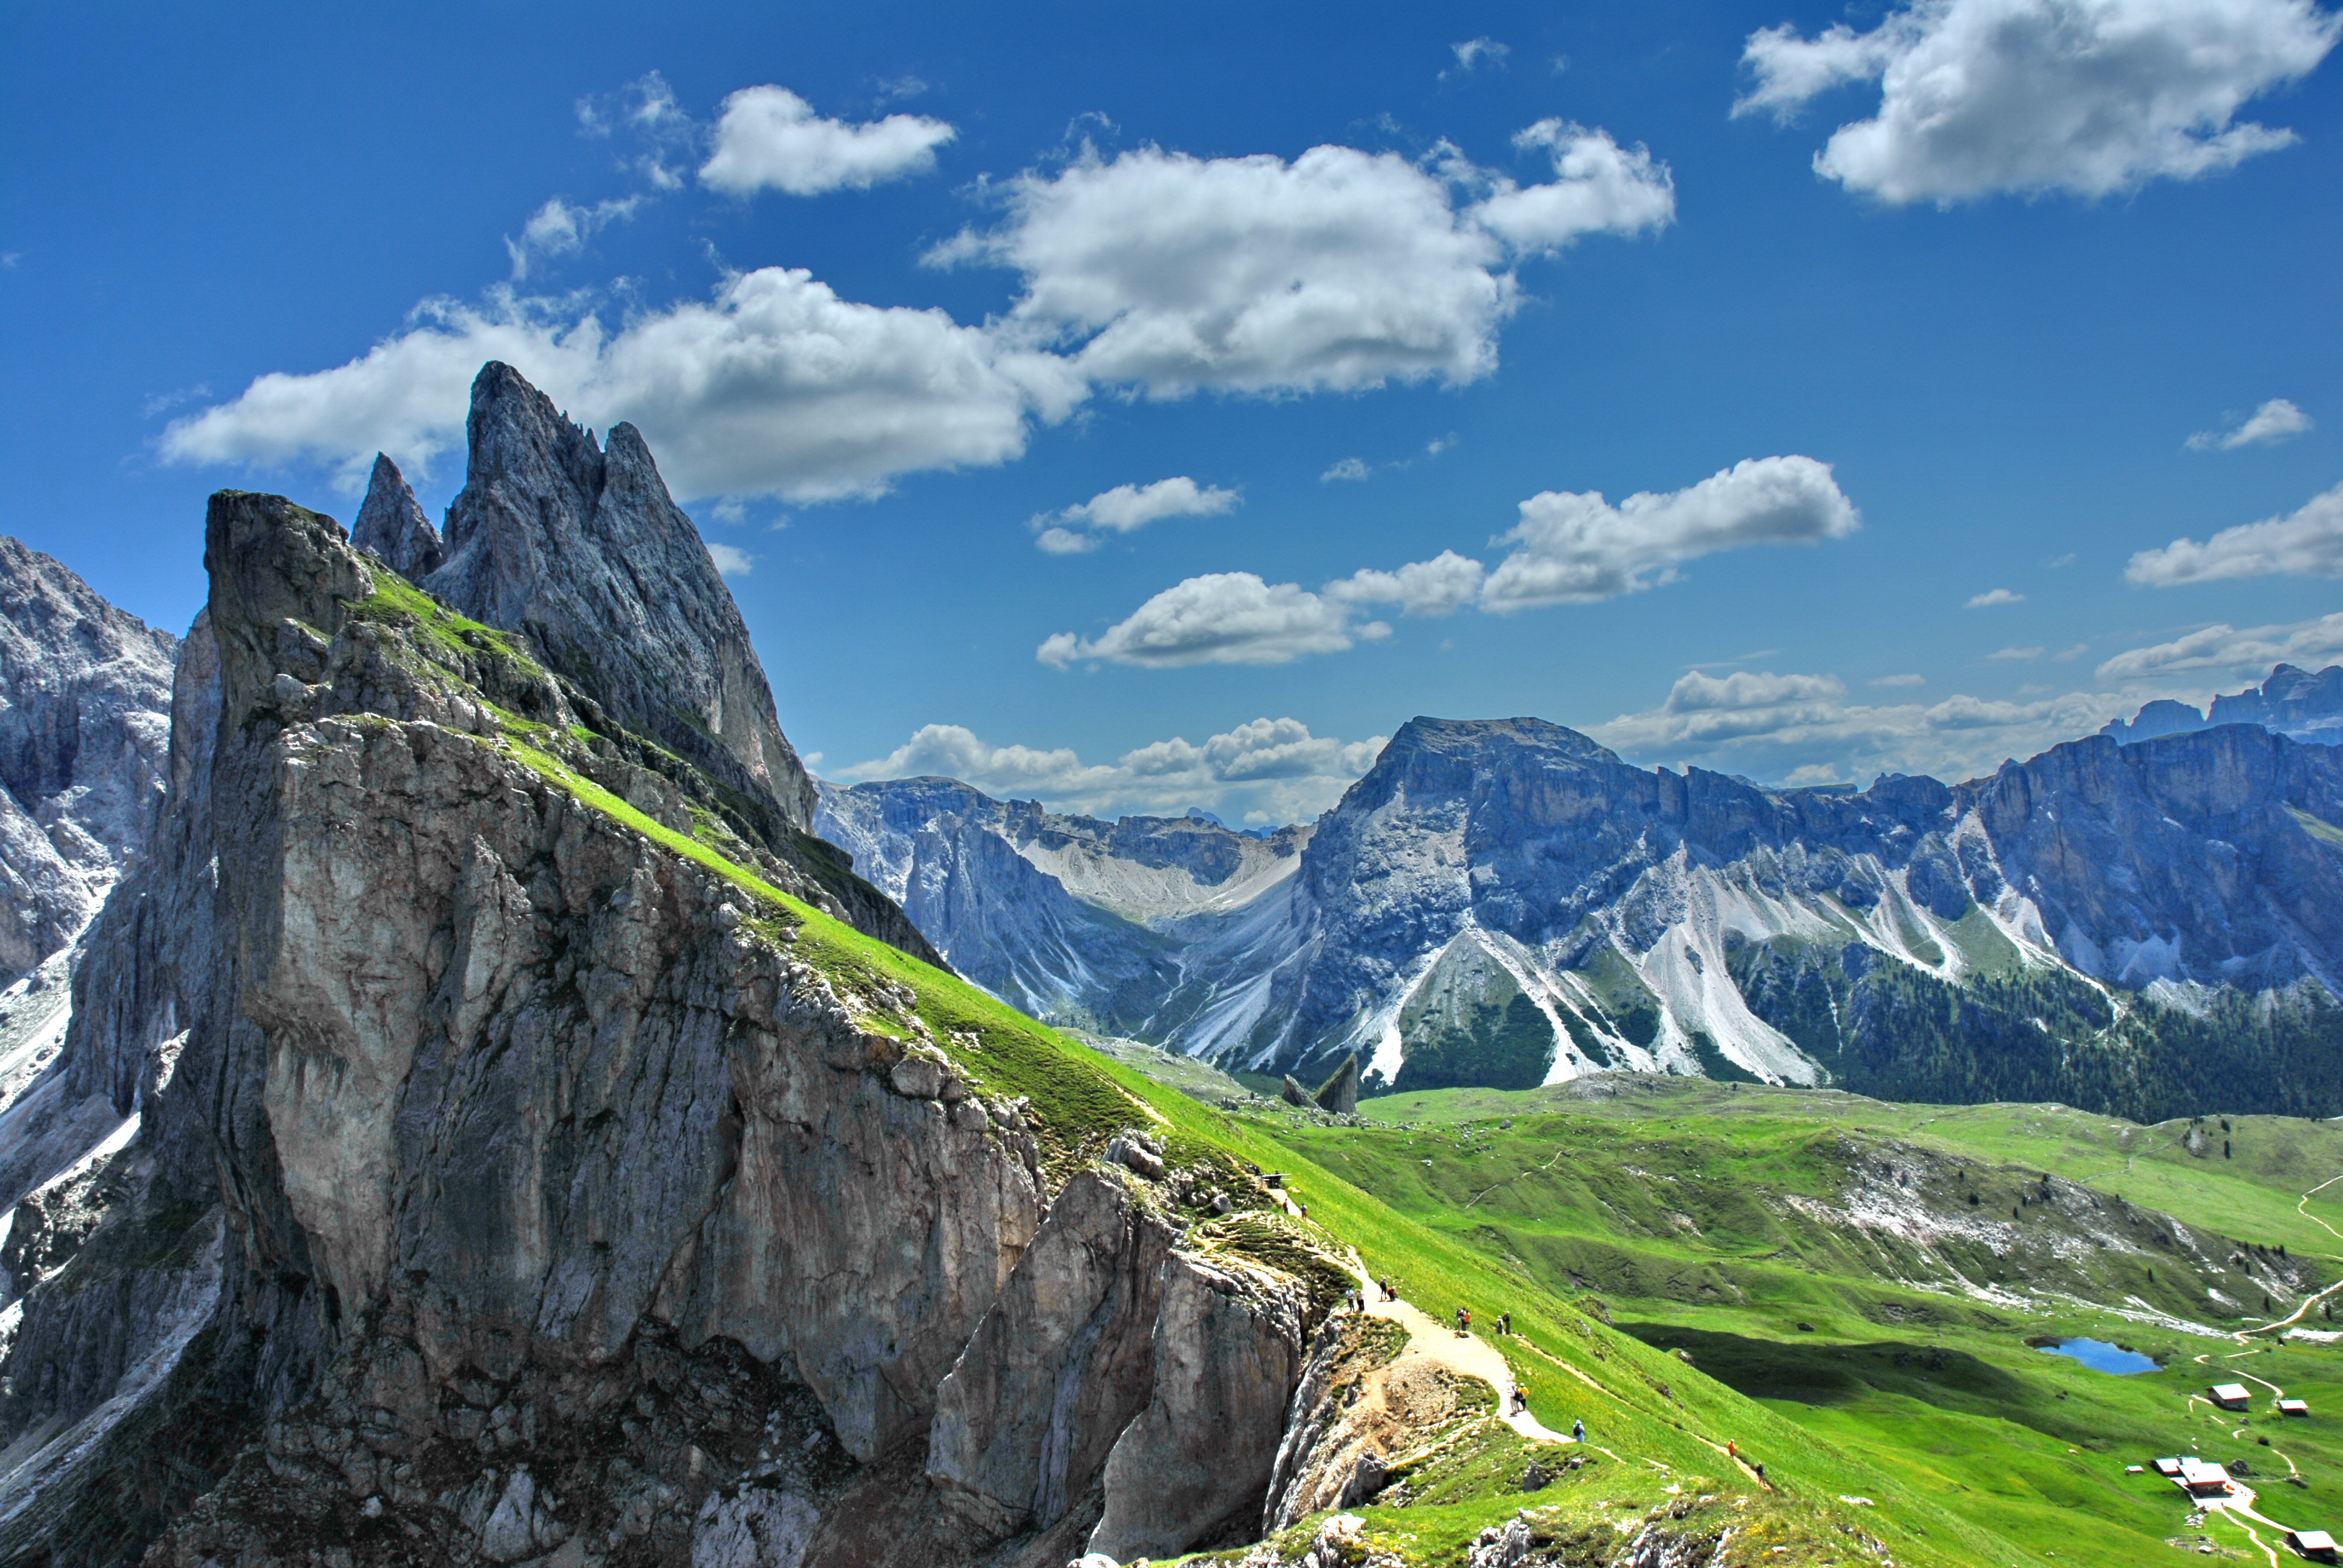 Alps In Summer At The Ski Resort Of Val Gardena Italy Wallpaper And